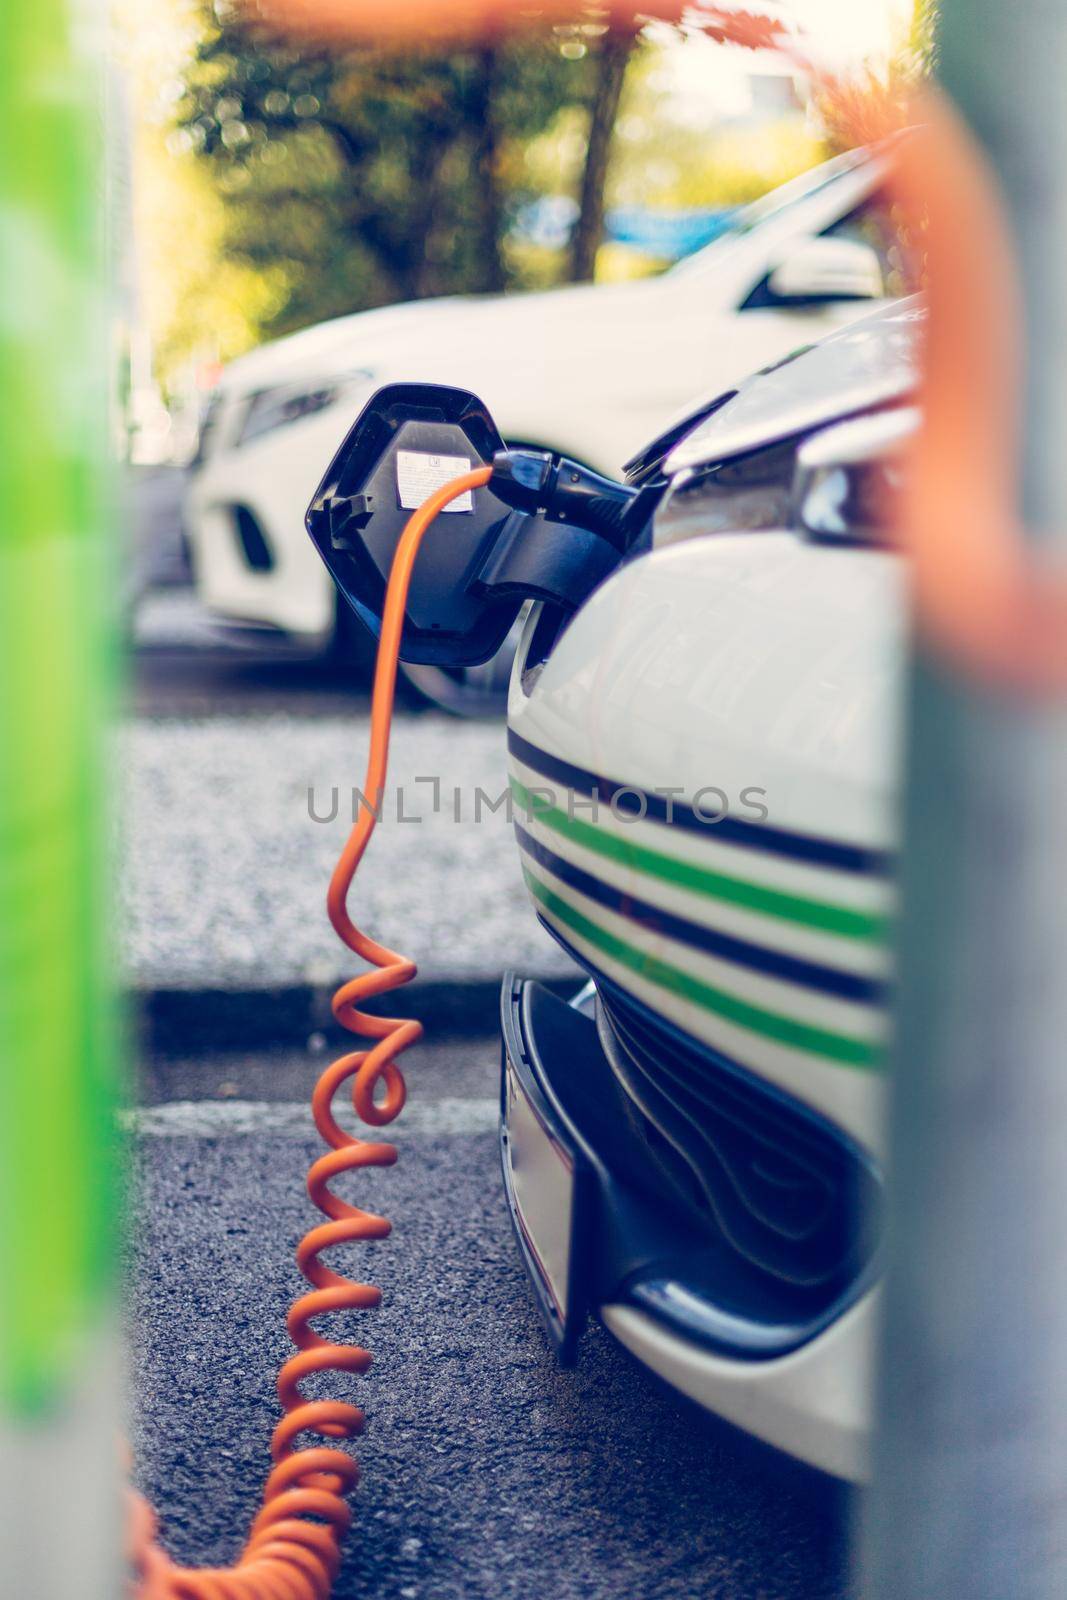 Electric car recharging with charge cable and plug leading to charge point.